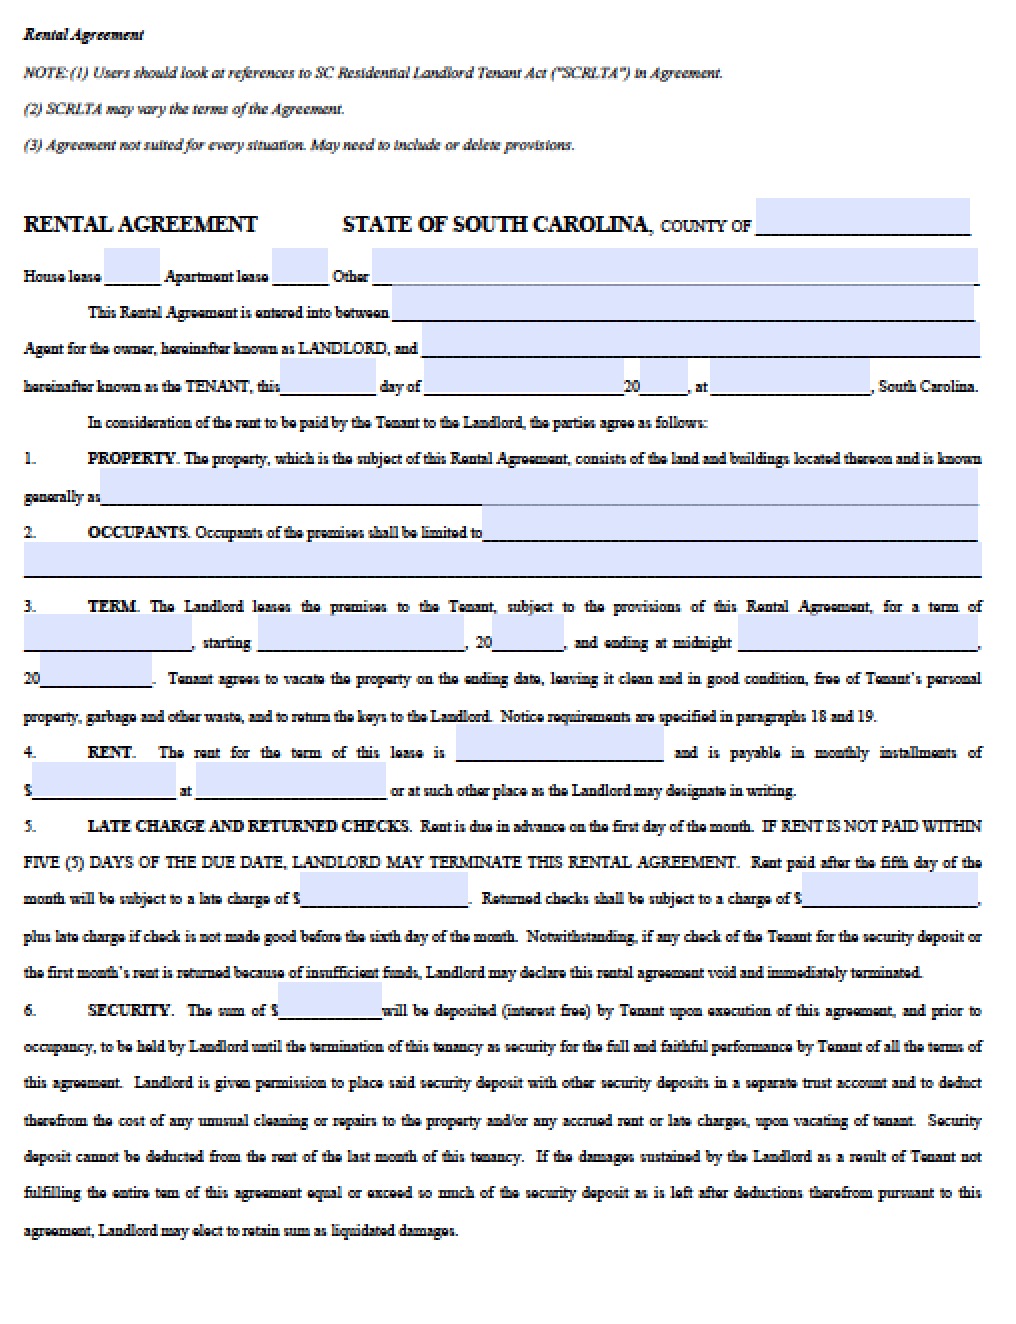 free south carolina standard residential lease agreement template pdf word